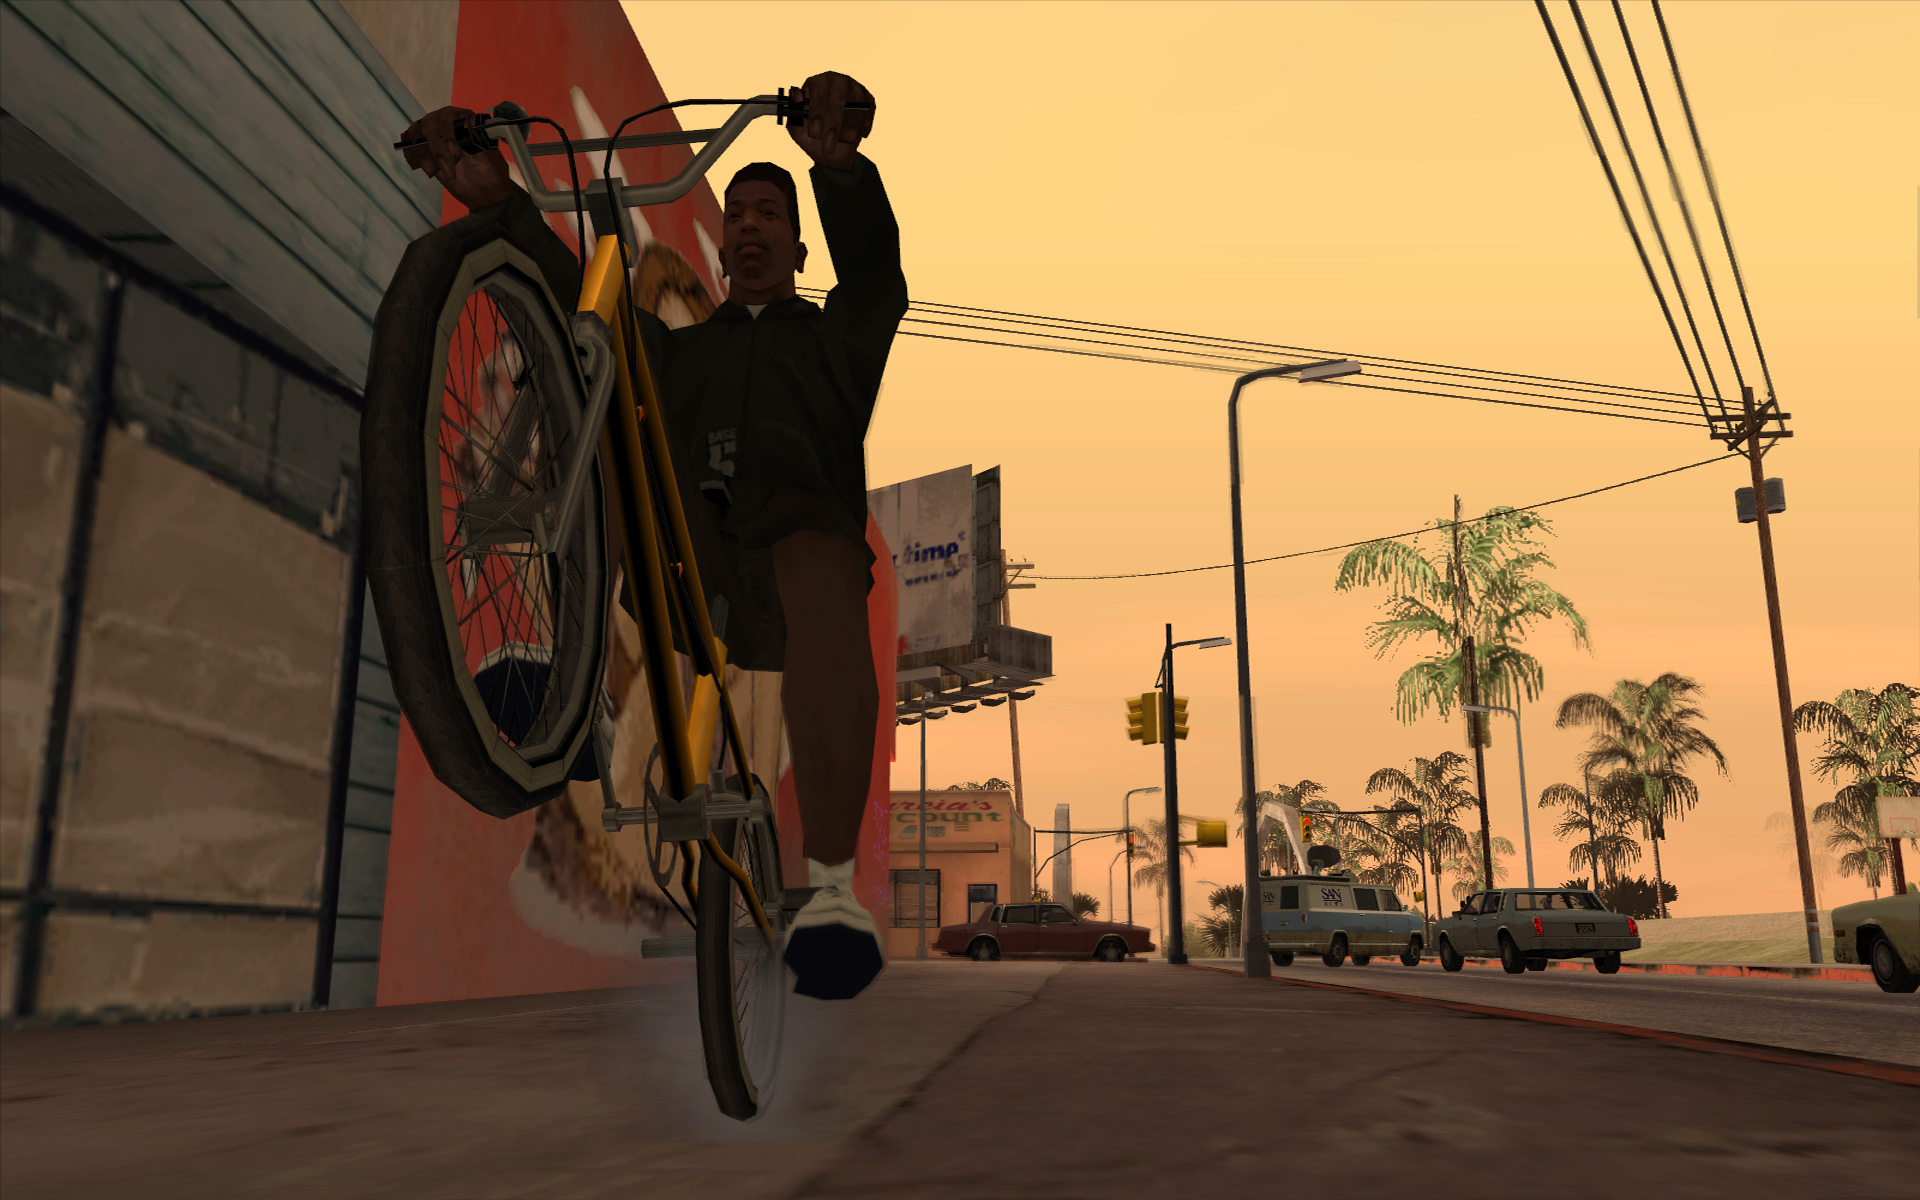 gta san andreas game download for pc free full version